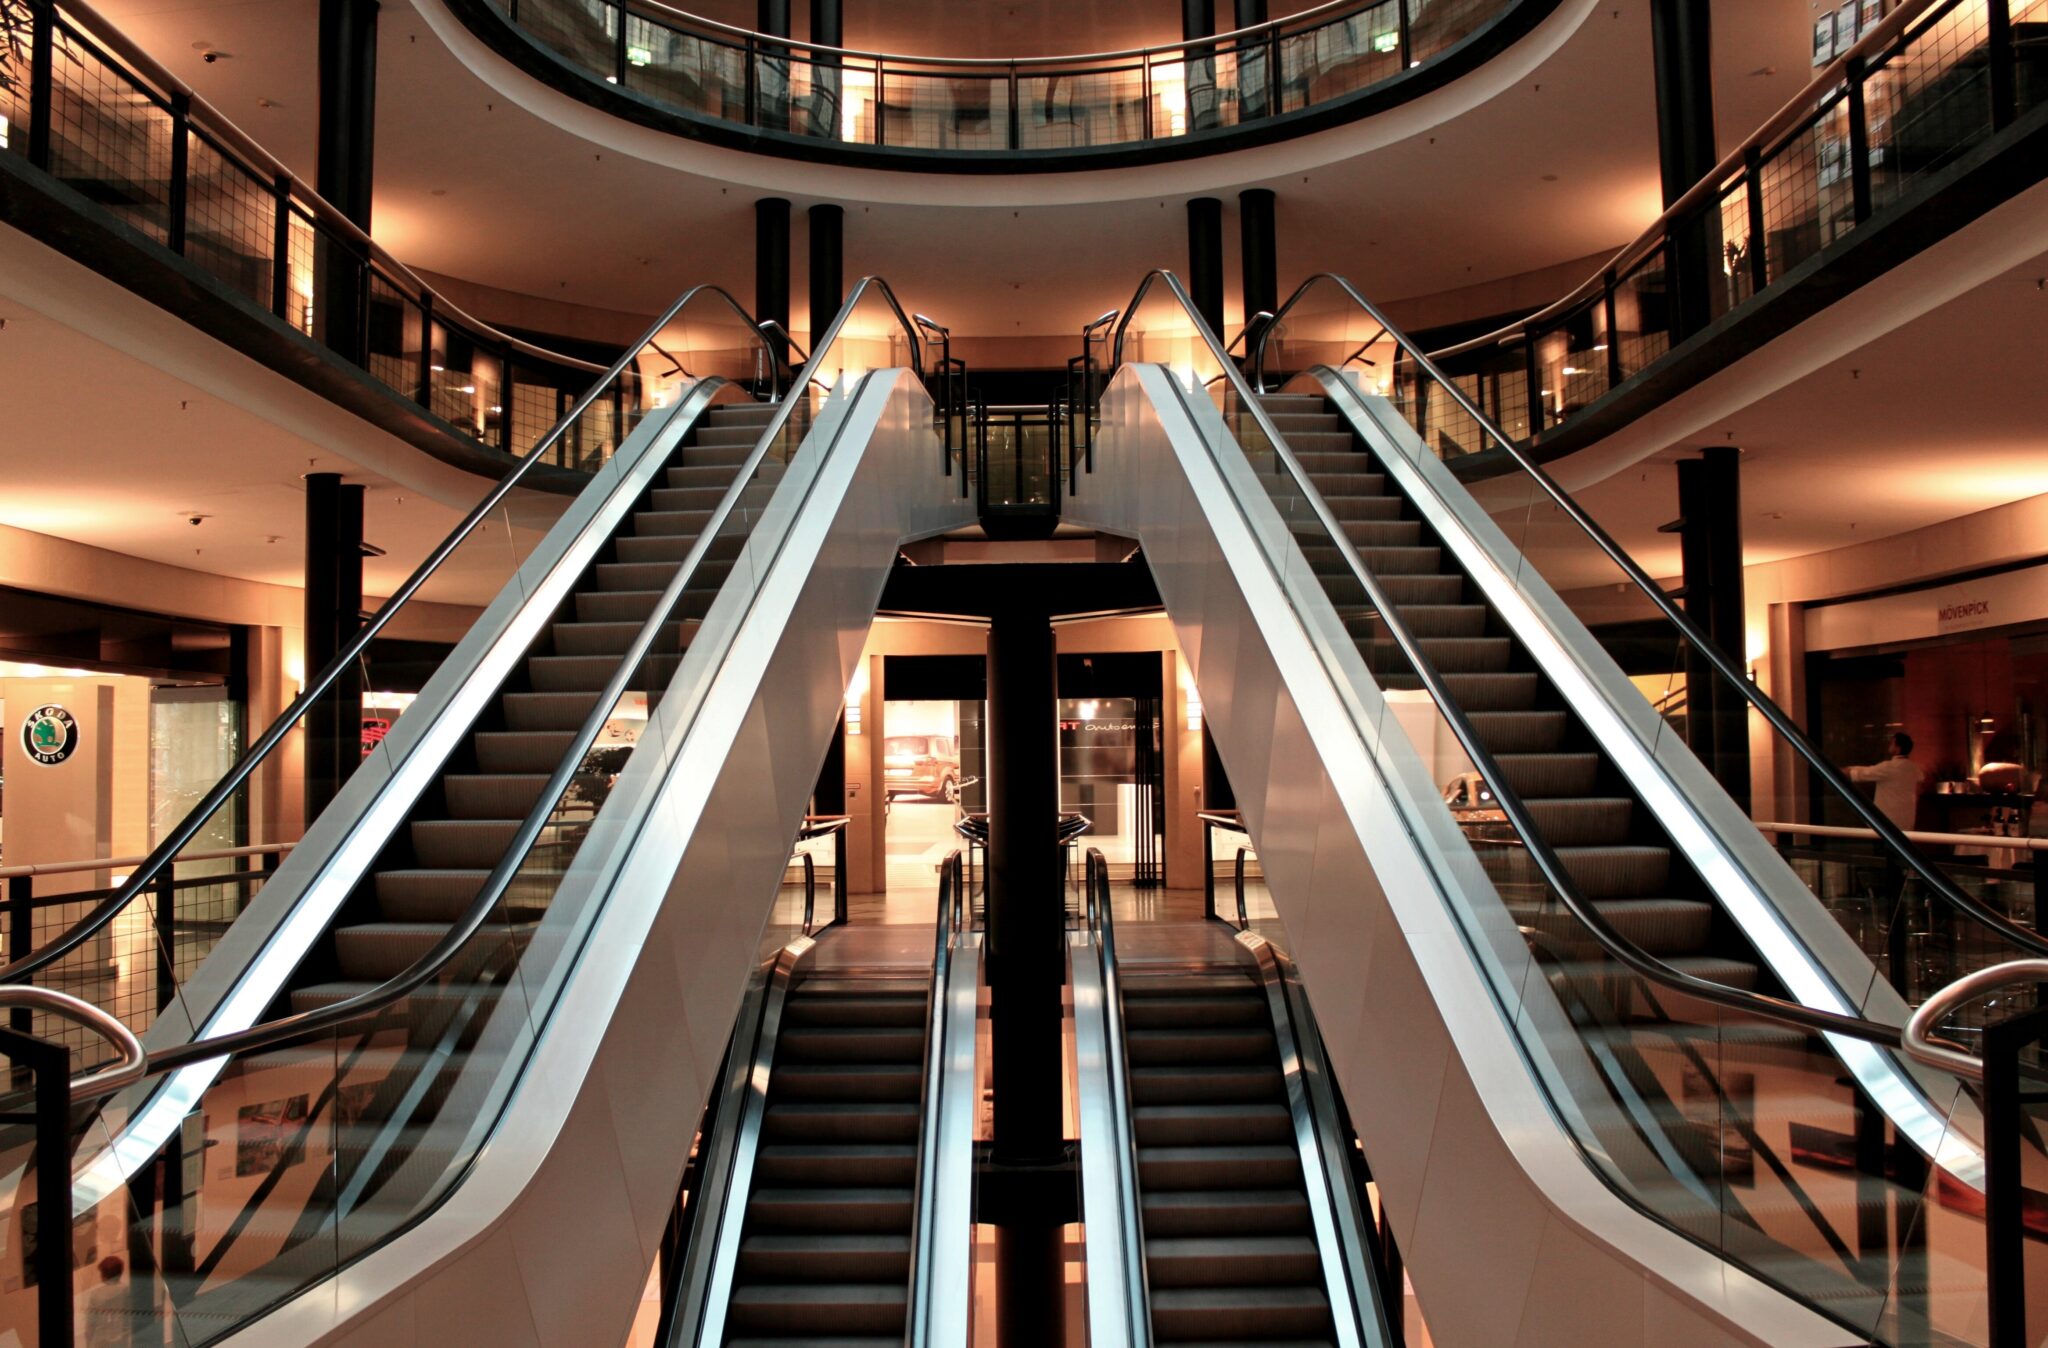 Large building with many escalators